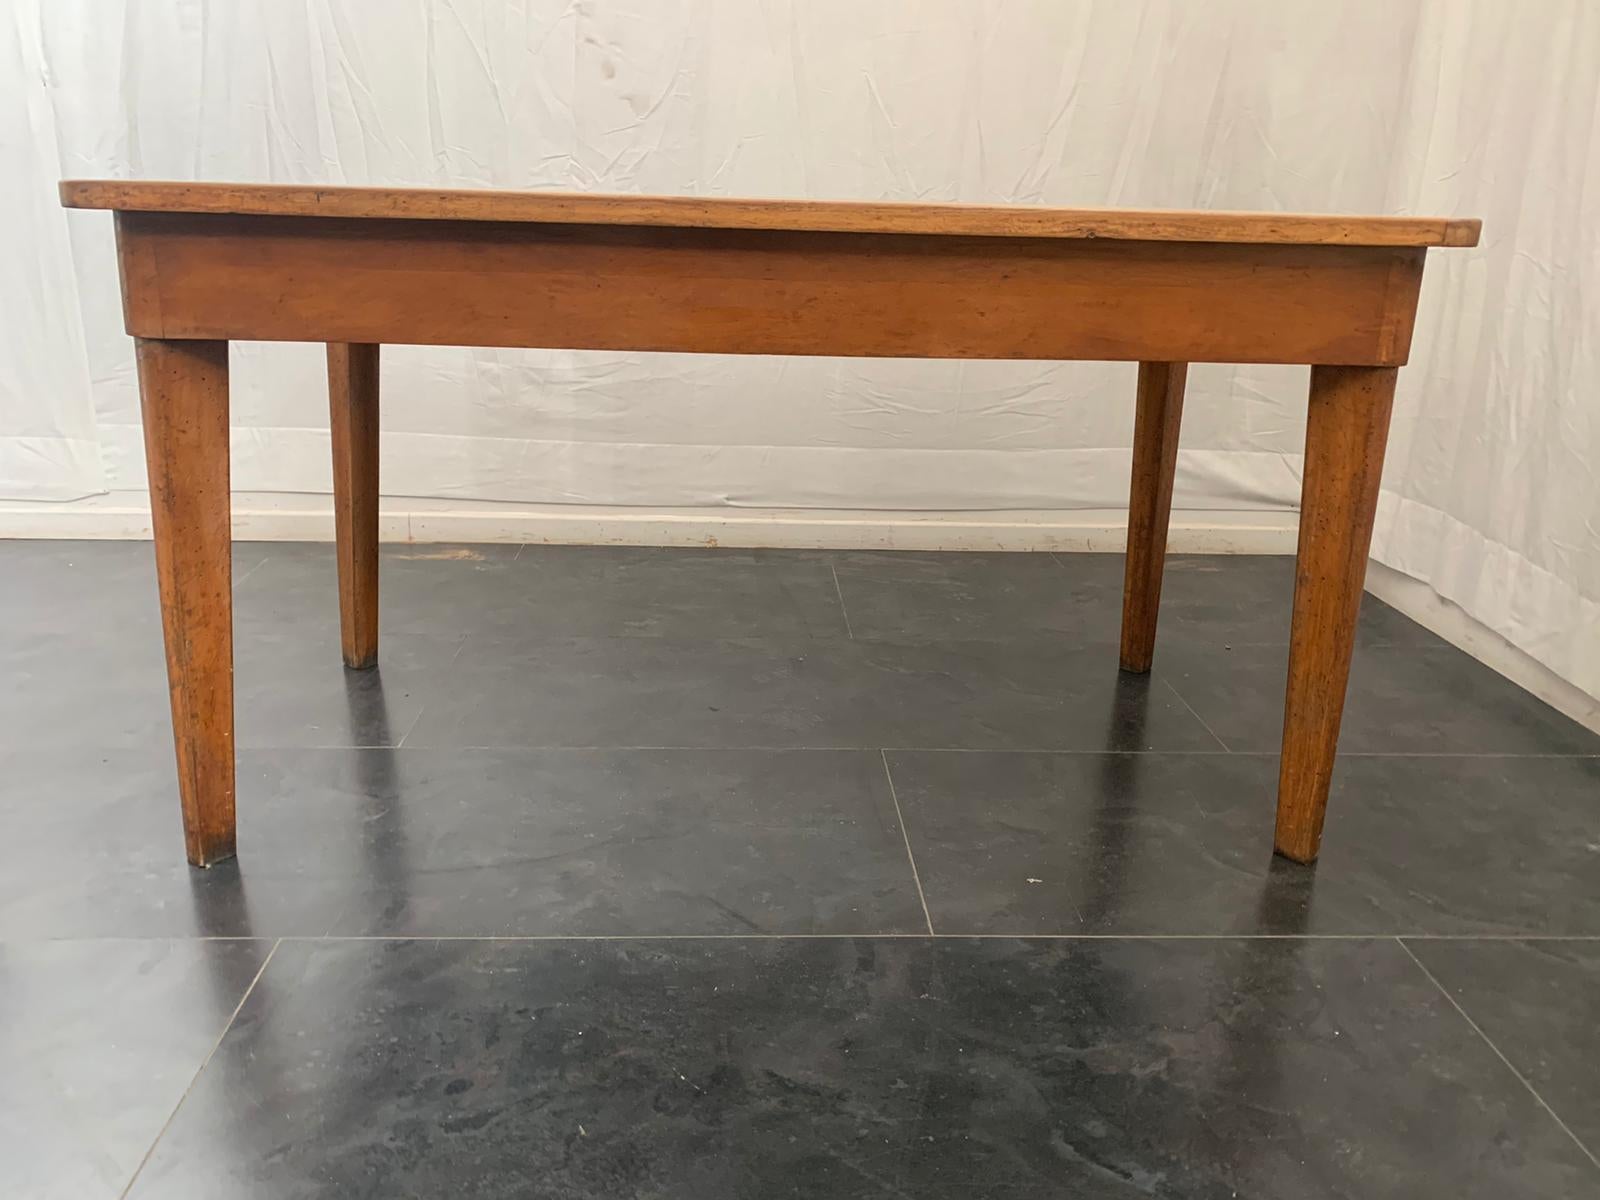 Cherry wood kitchen table with beechwood edged top, glass handle.
Packaging with bubble wrap and cardboard boxes is included. If the wooden packaging is needed (fumigated crates or boxes) for US and International Shipping, it's required a separate